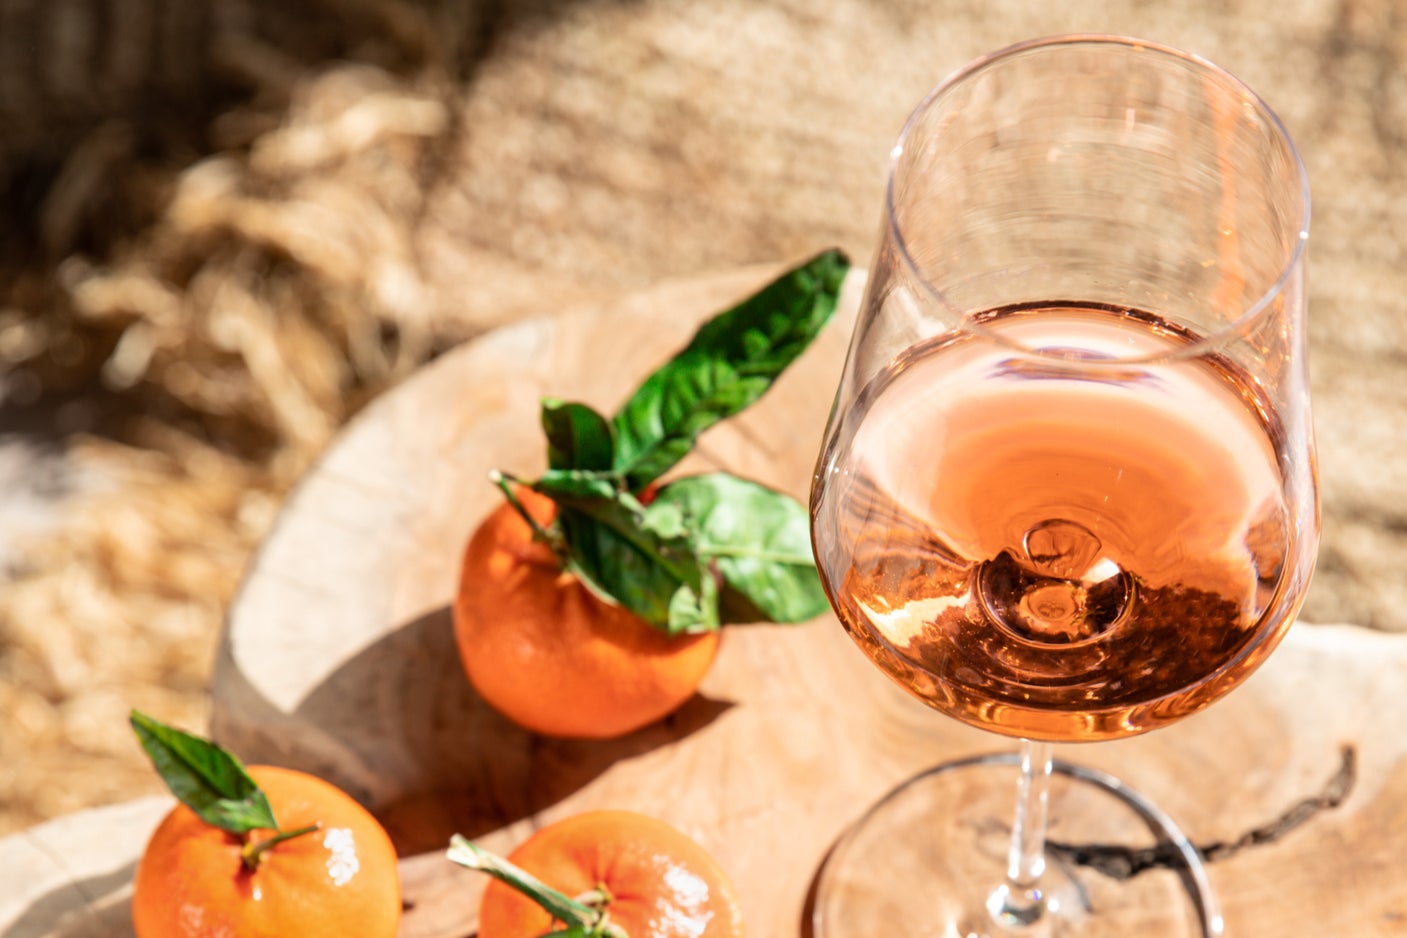 Orange wine is nothing new – it’s been around for 8,000 years and hails from Georgia